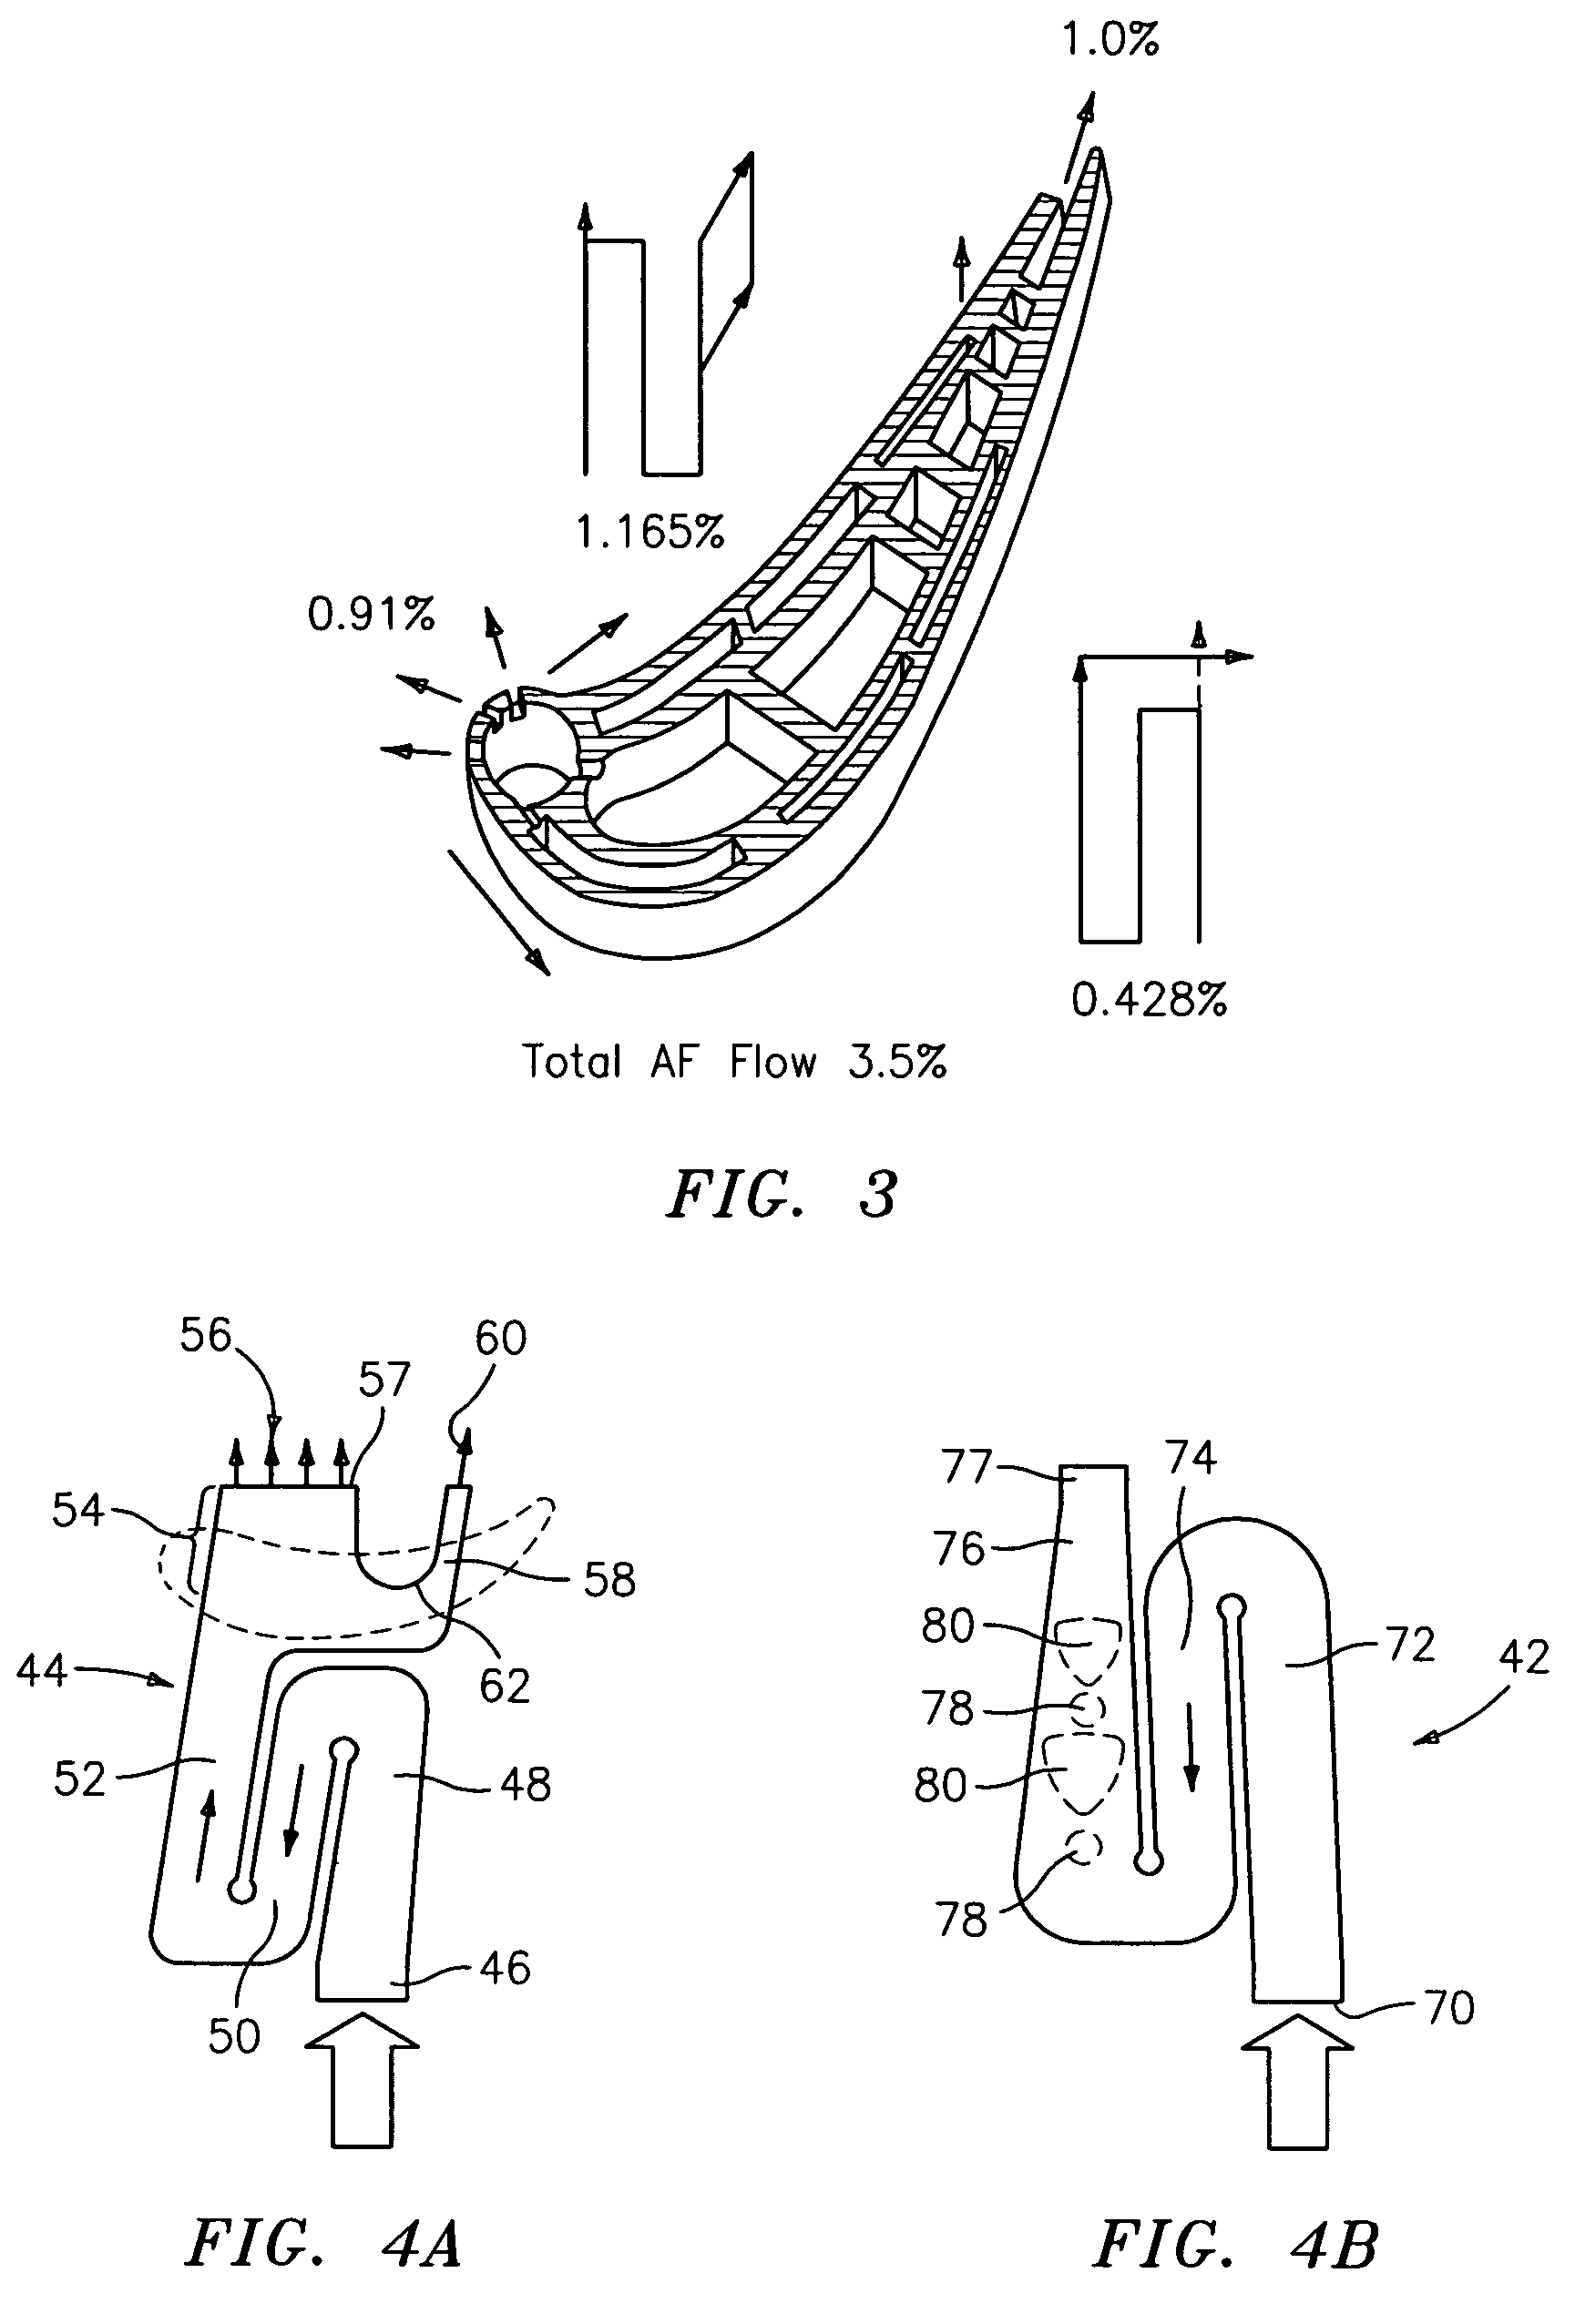 Serpentine microcircuit cooling with pressure side features